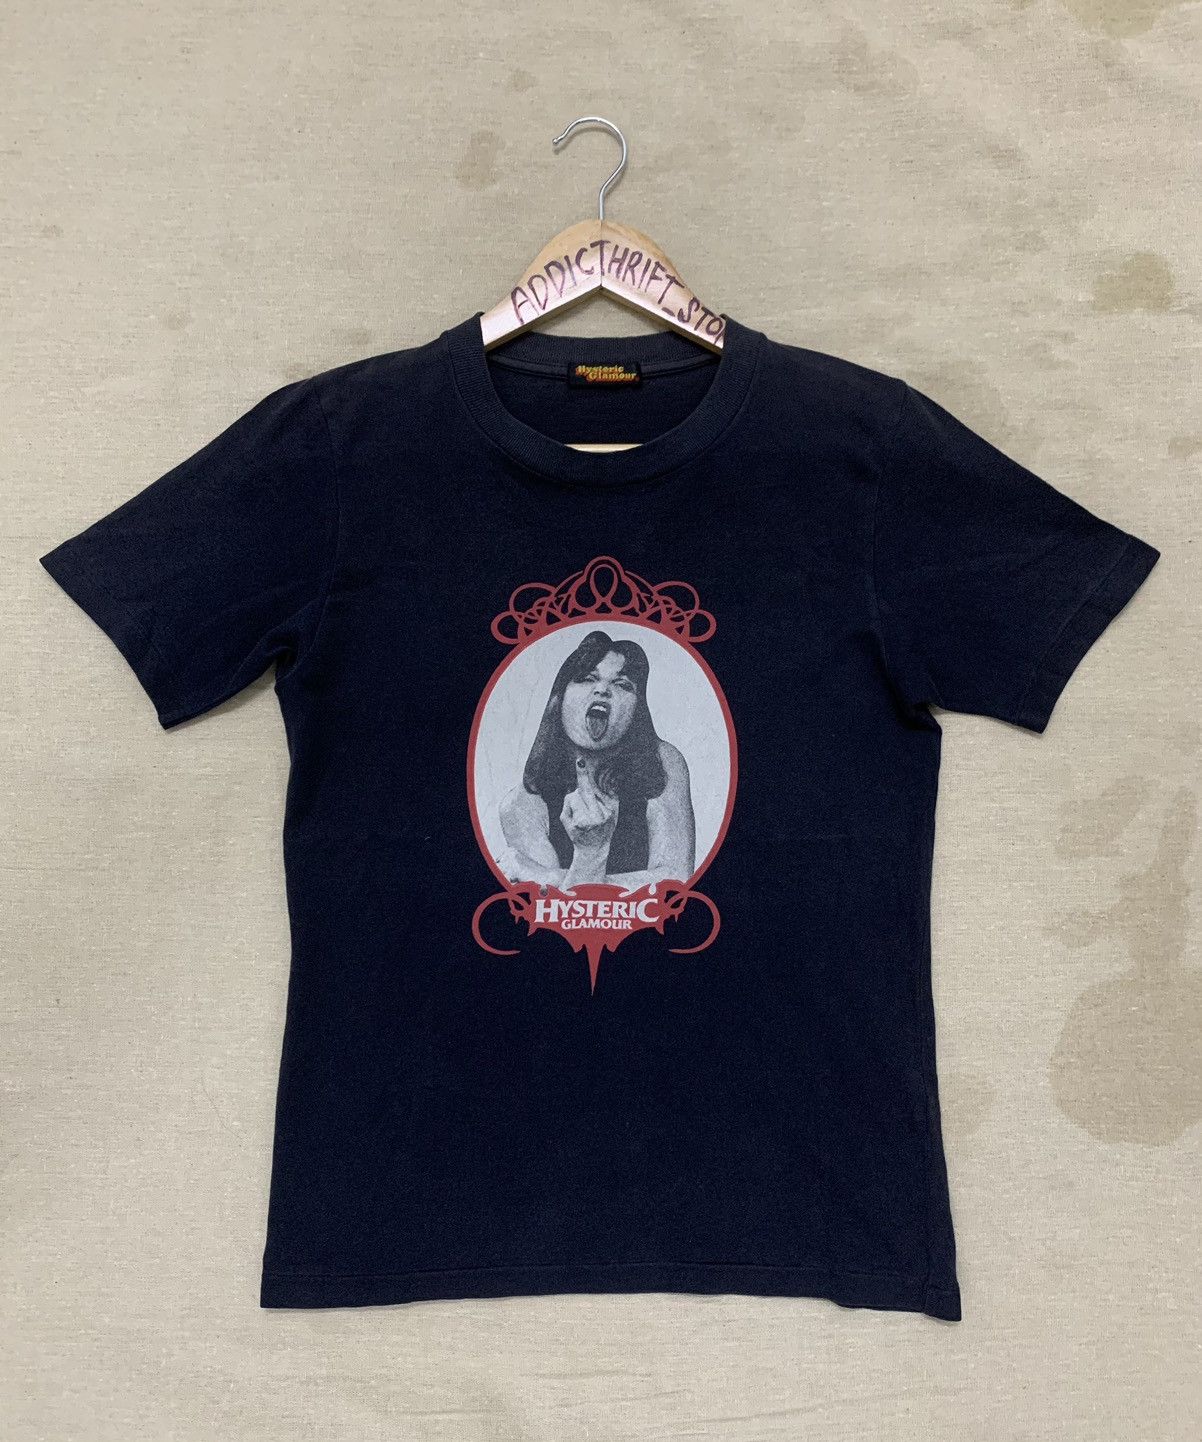 Vintage VINTAGE HYSTERIC GLAMOUR “FUCK YOU” HAND GESTURE | Grailed